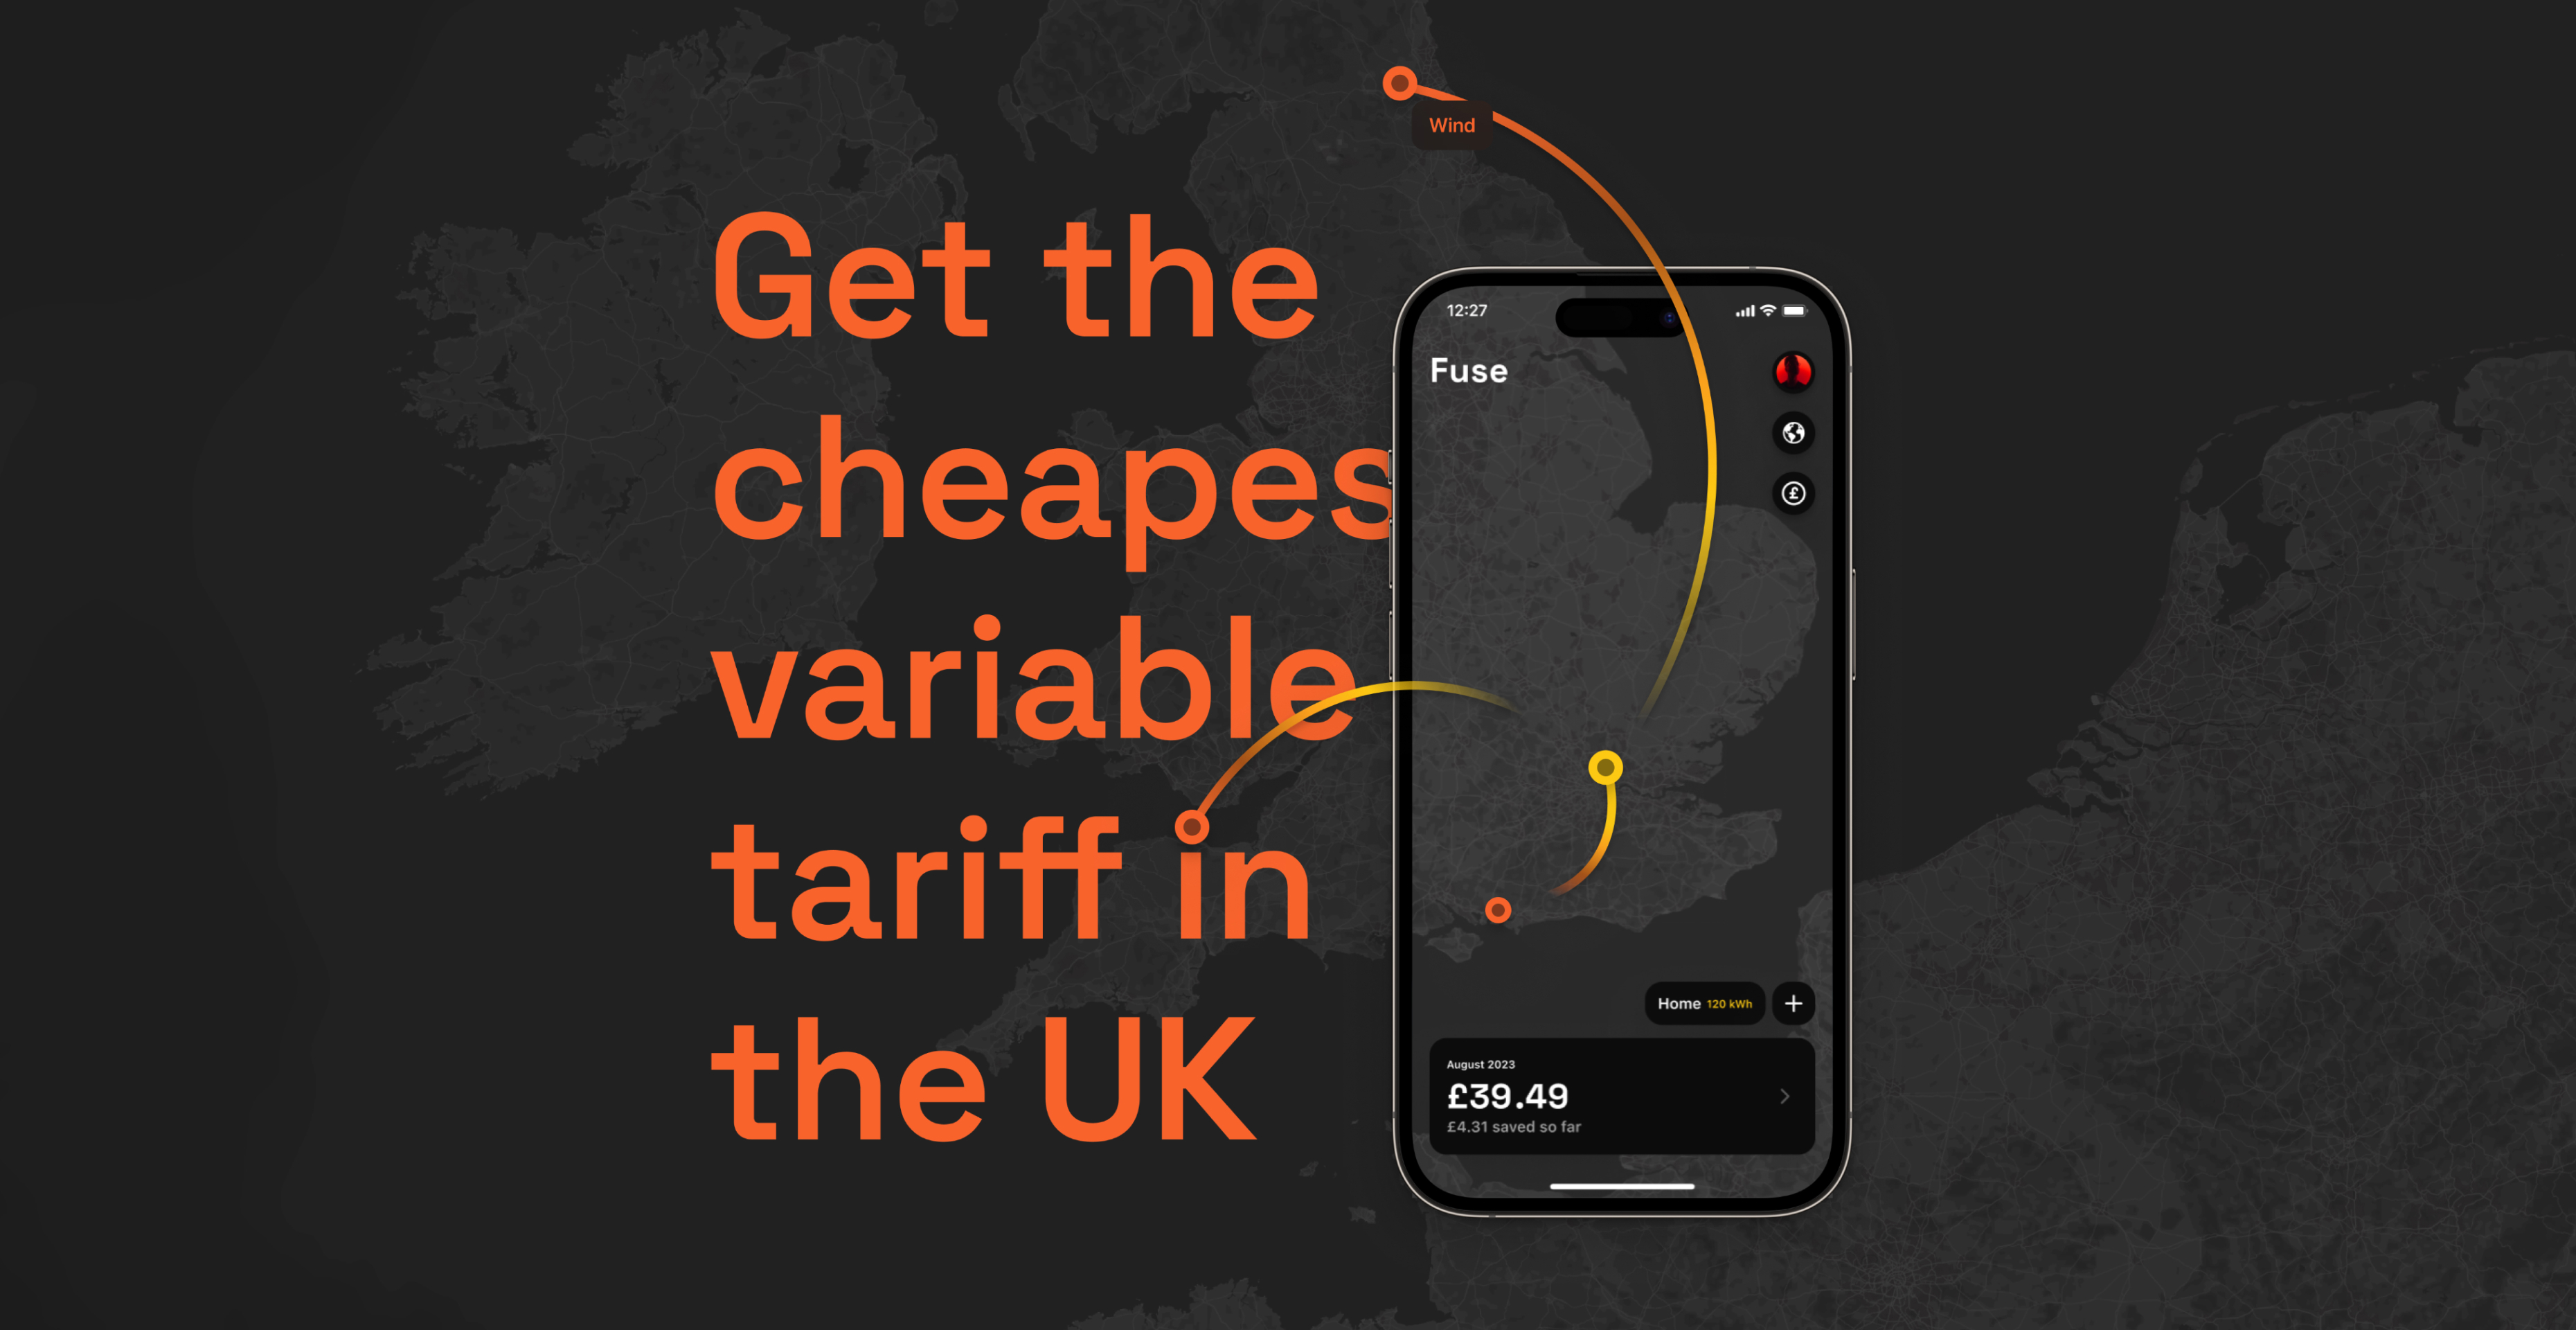 Save Â£50 with cheapert tariff in the UK